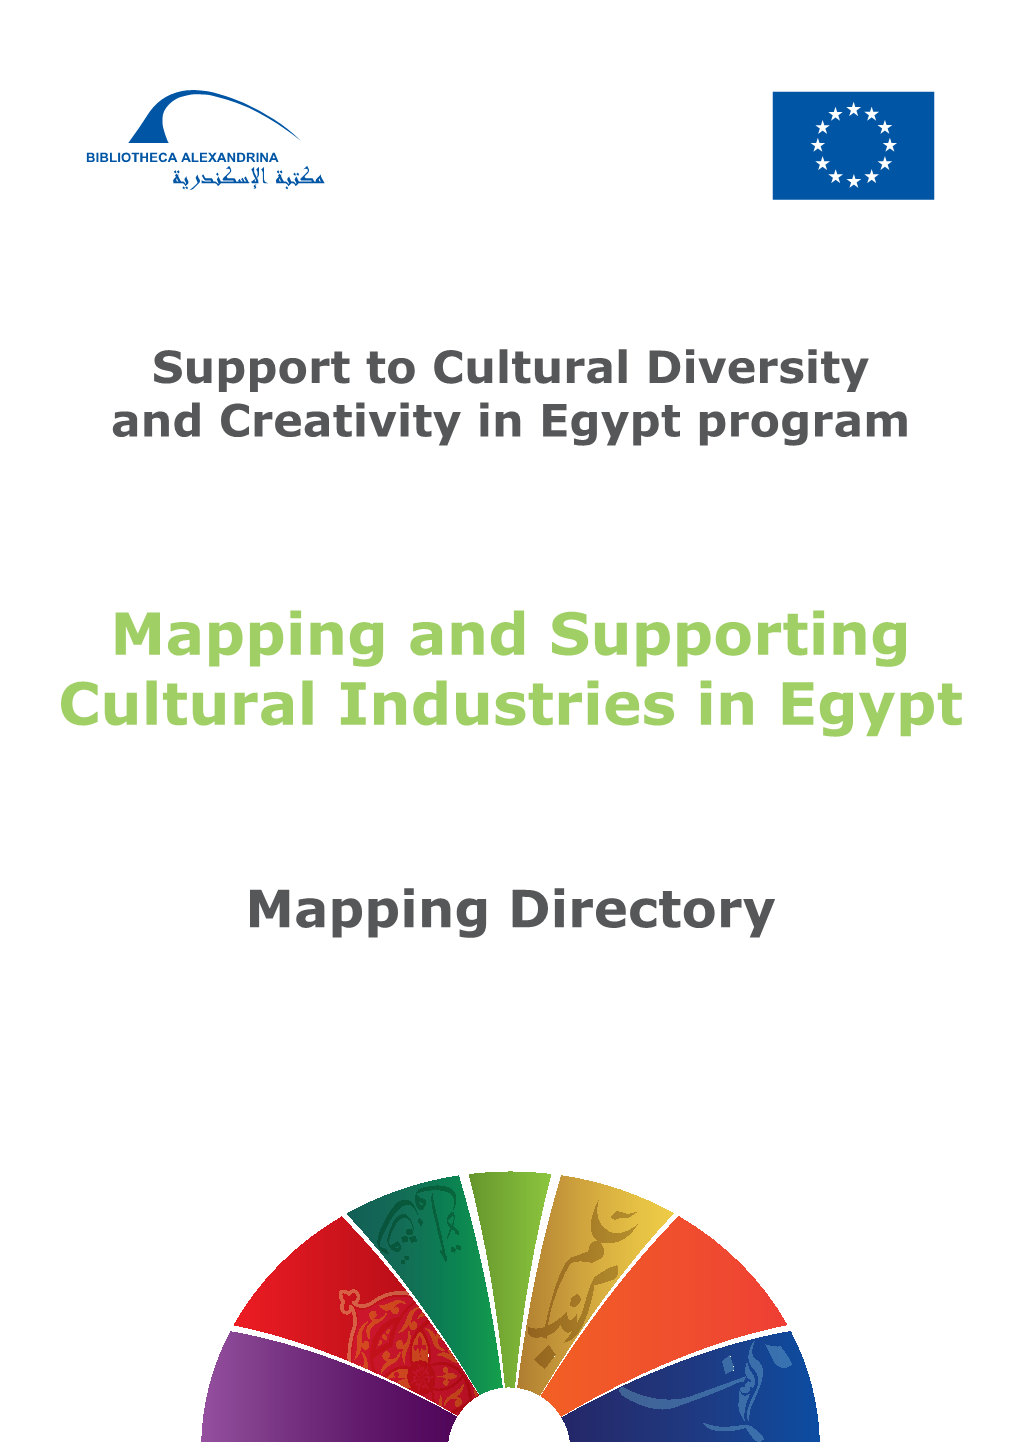 Mapping and Supporting Cultural Industries in Egypt